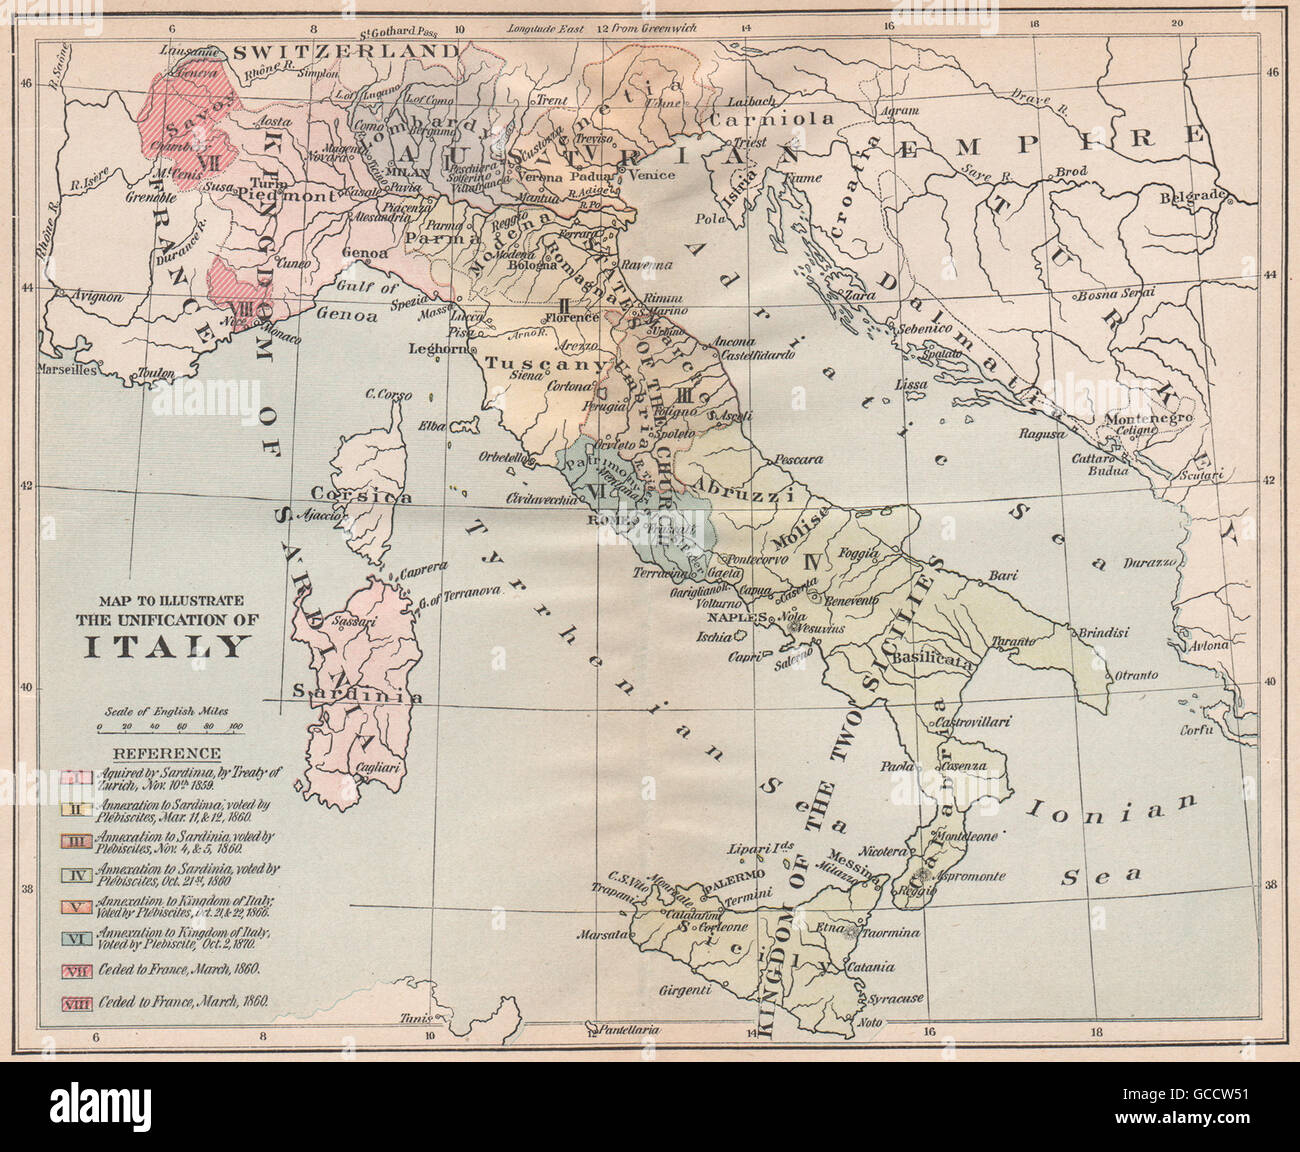 UNIFICATION OF ITALY. Acquisitions & annexations 1859-1870, 1917 vintage map Stock Photo